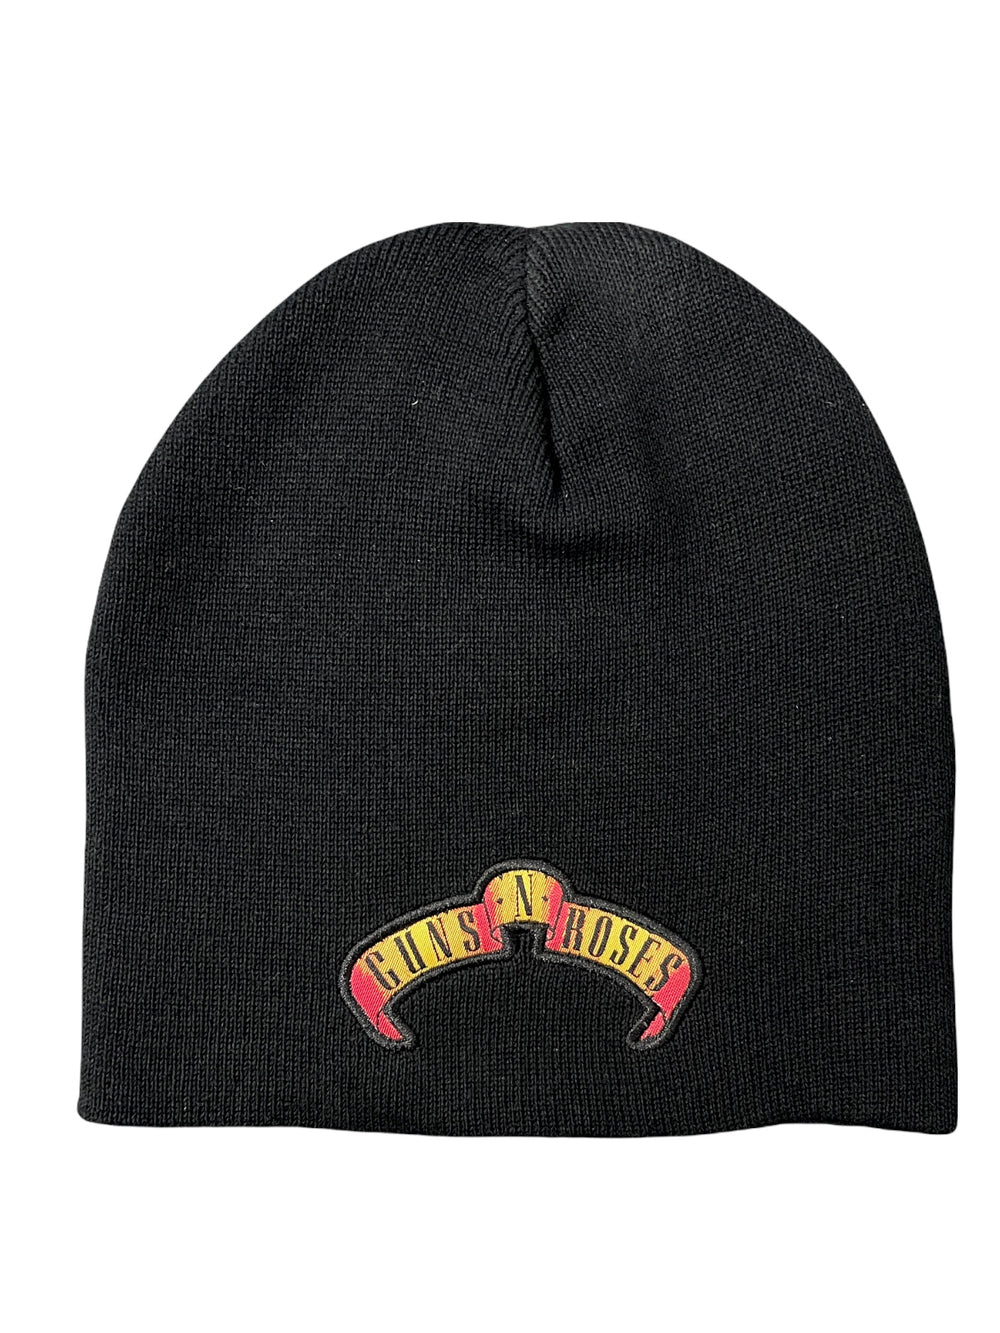 Guns & Roses Appetite Patch Official Beanie Hat One Size Fits All Brand New